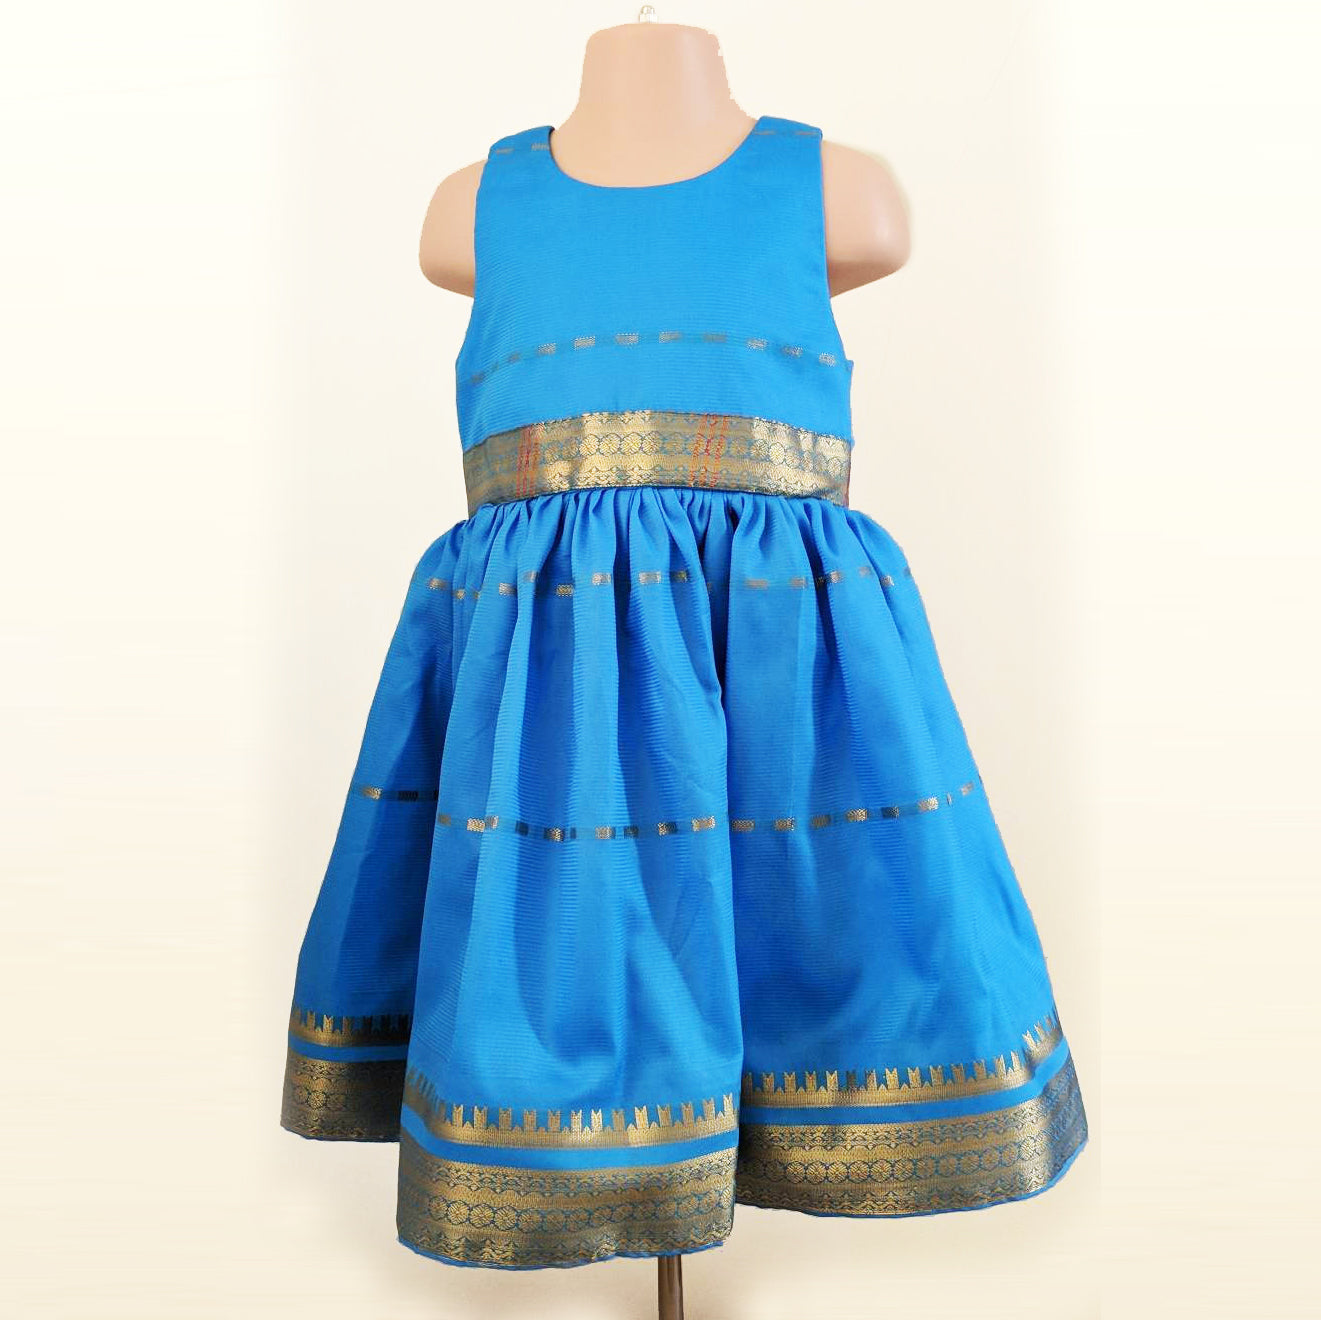 Bright Blue Girls Party Dress size 3-4